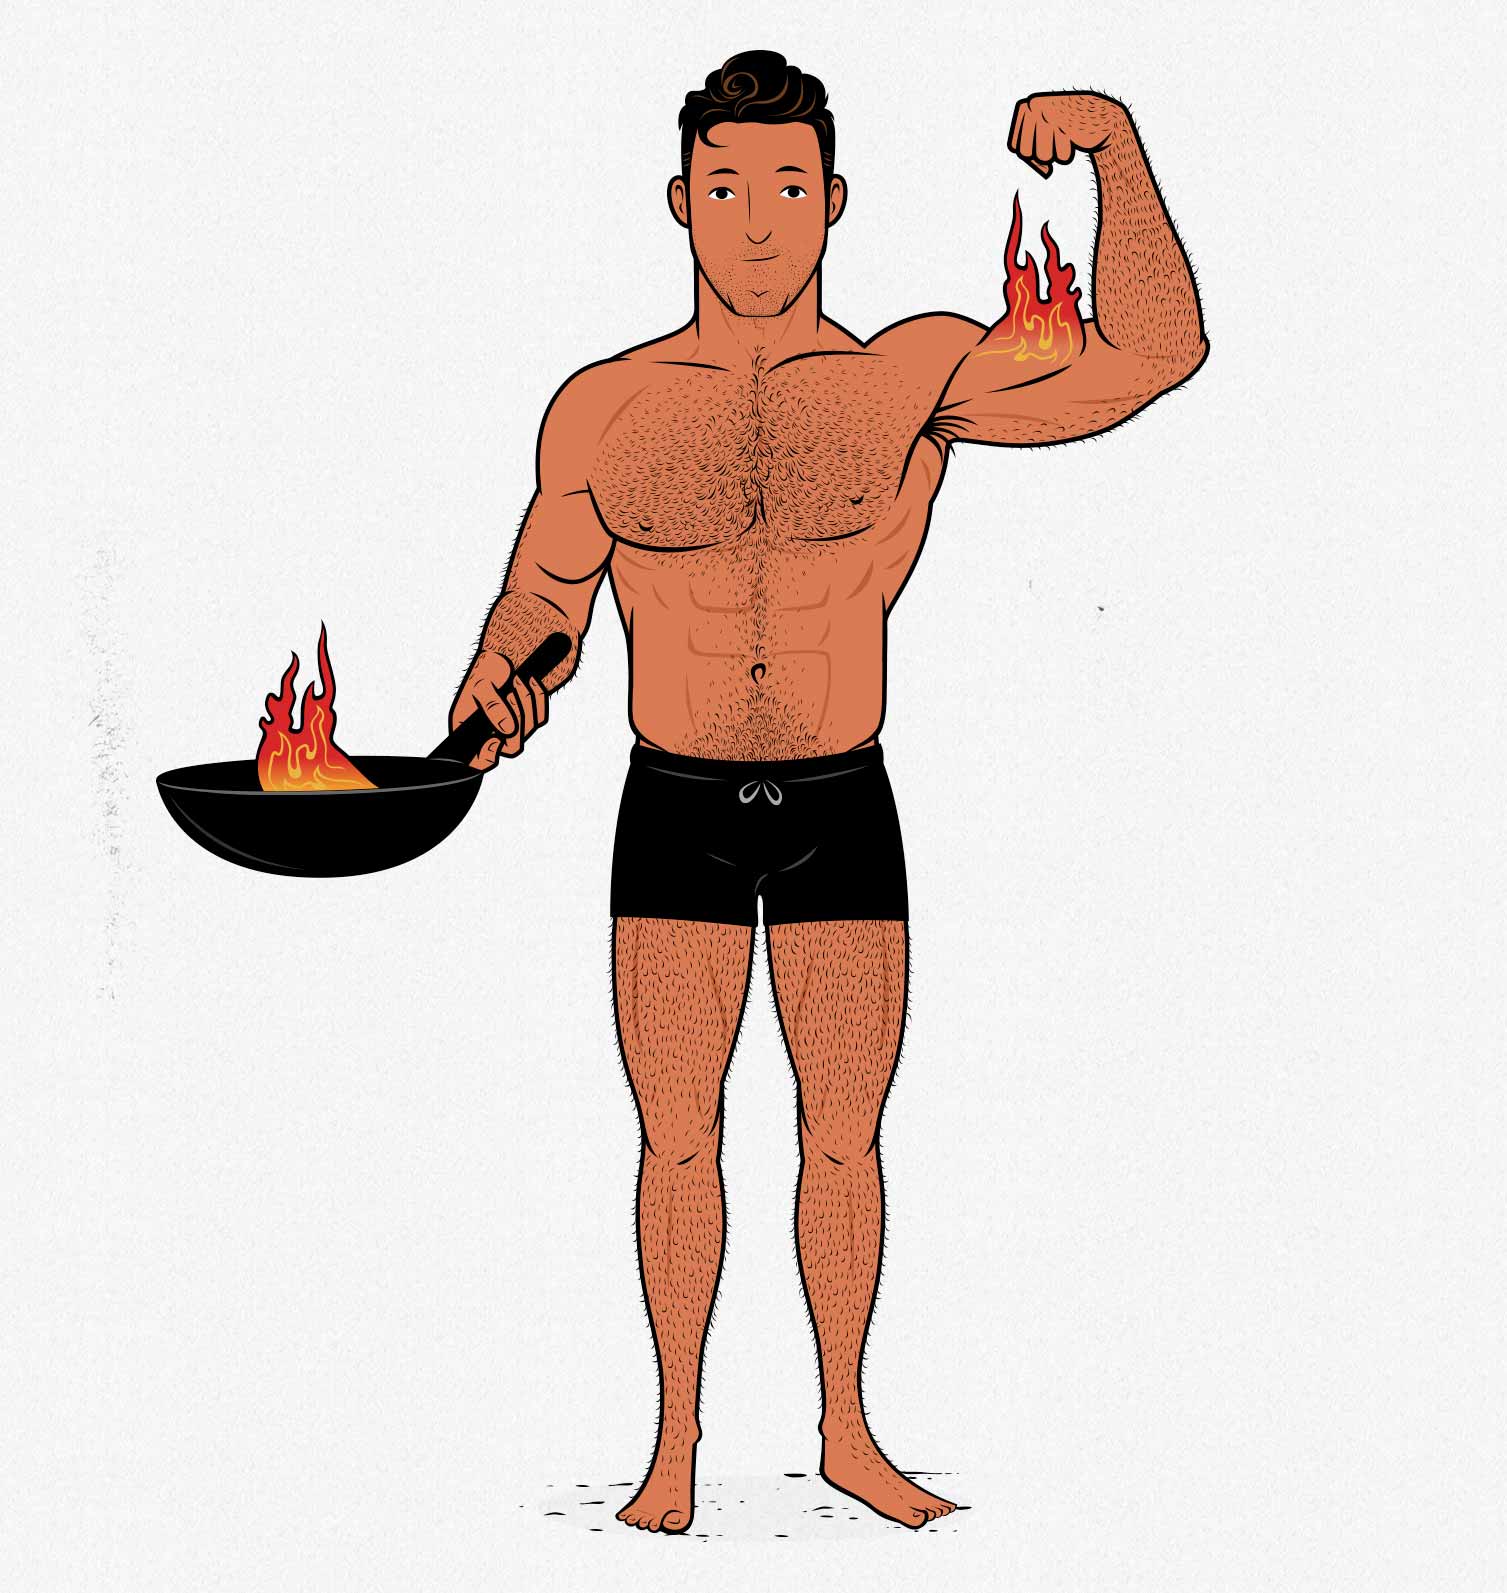 Illustration of a bodybuilder cooking up a muscle-building meal.